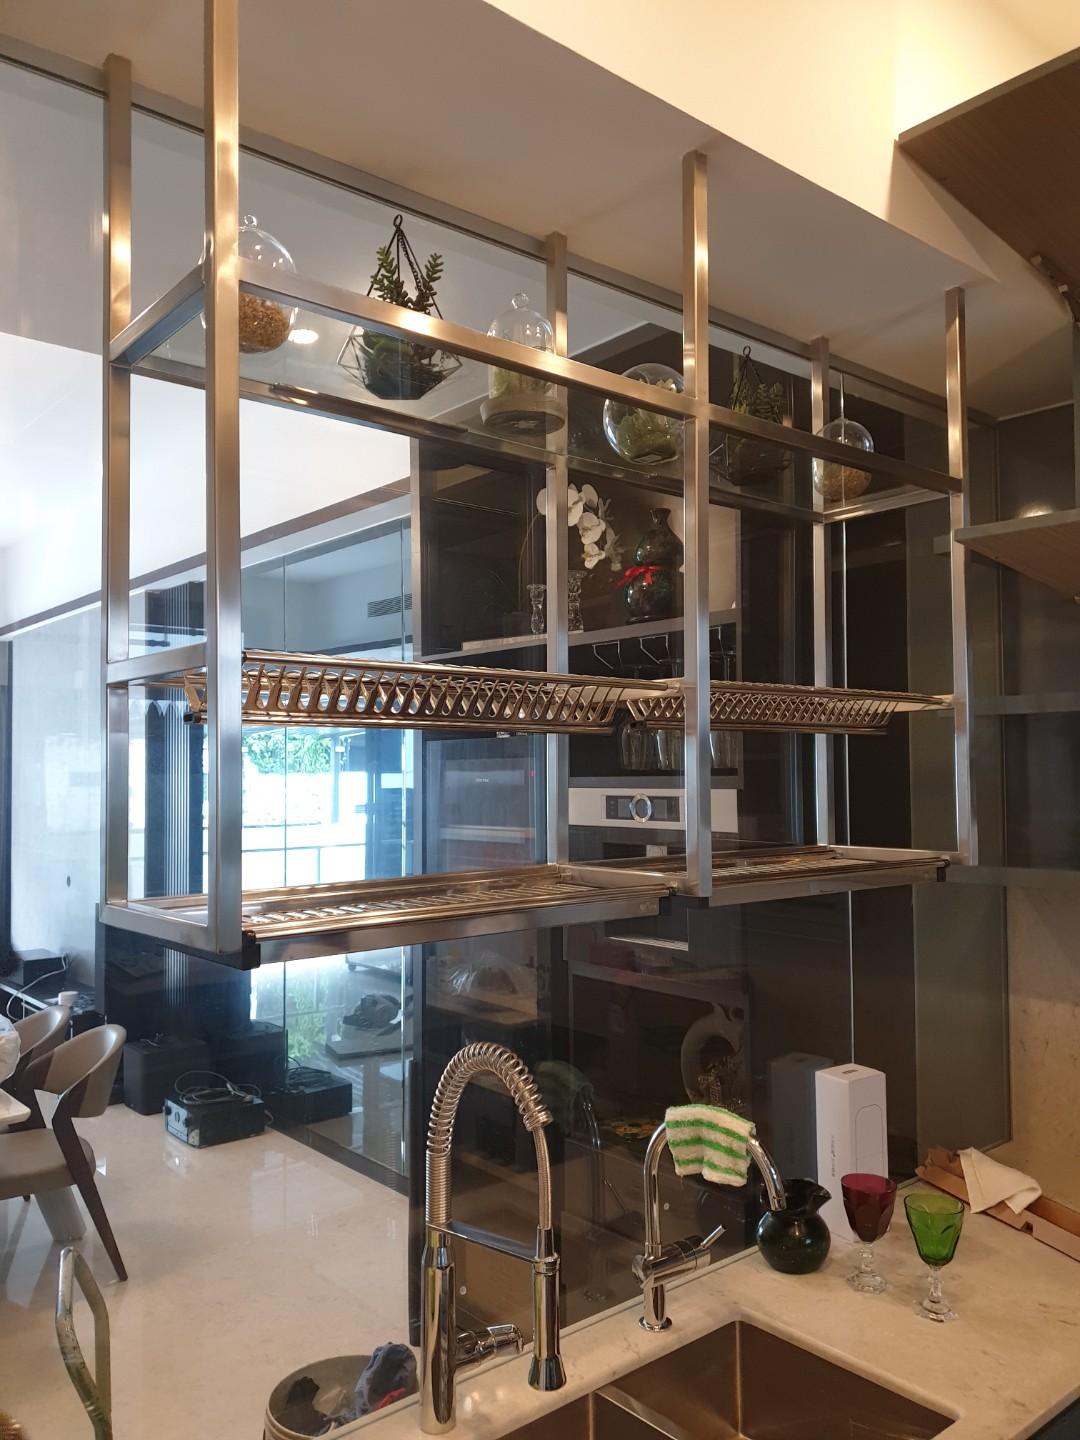 https://media.karousell.com/media/photos/products/2020/02/14/dish_rack_suspended__ceiling_mounted_1581650360_f531a1d0_progressive.jpg